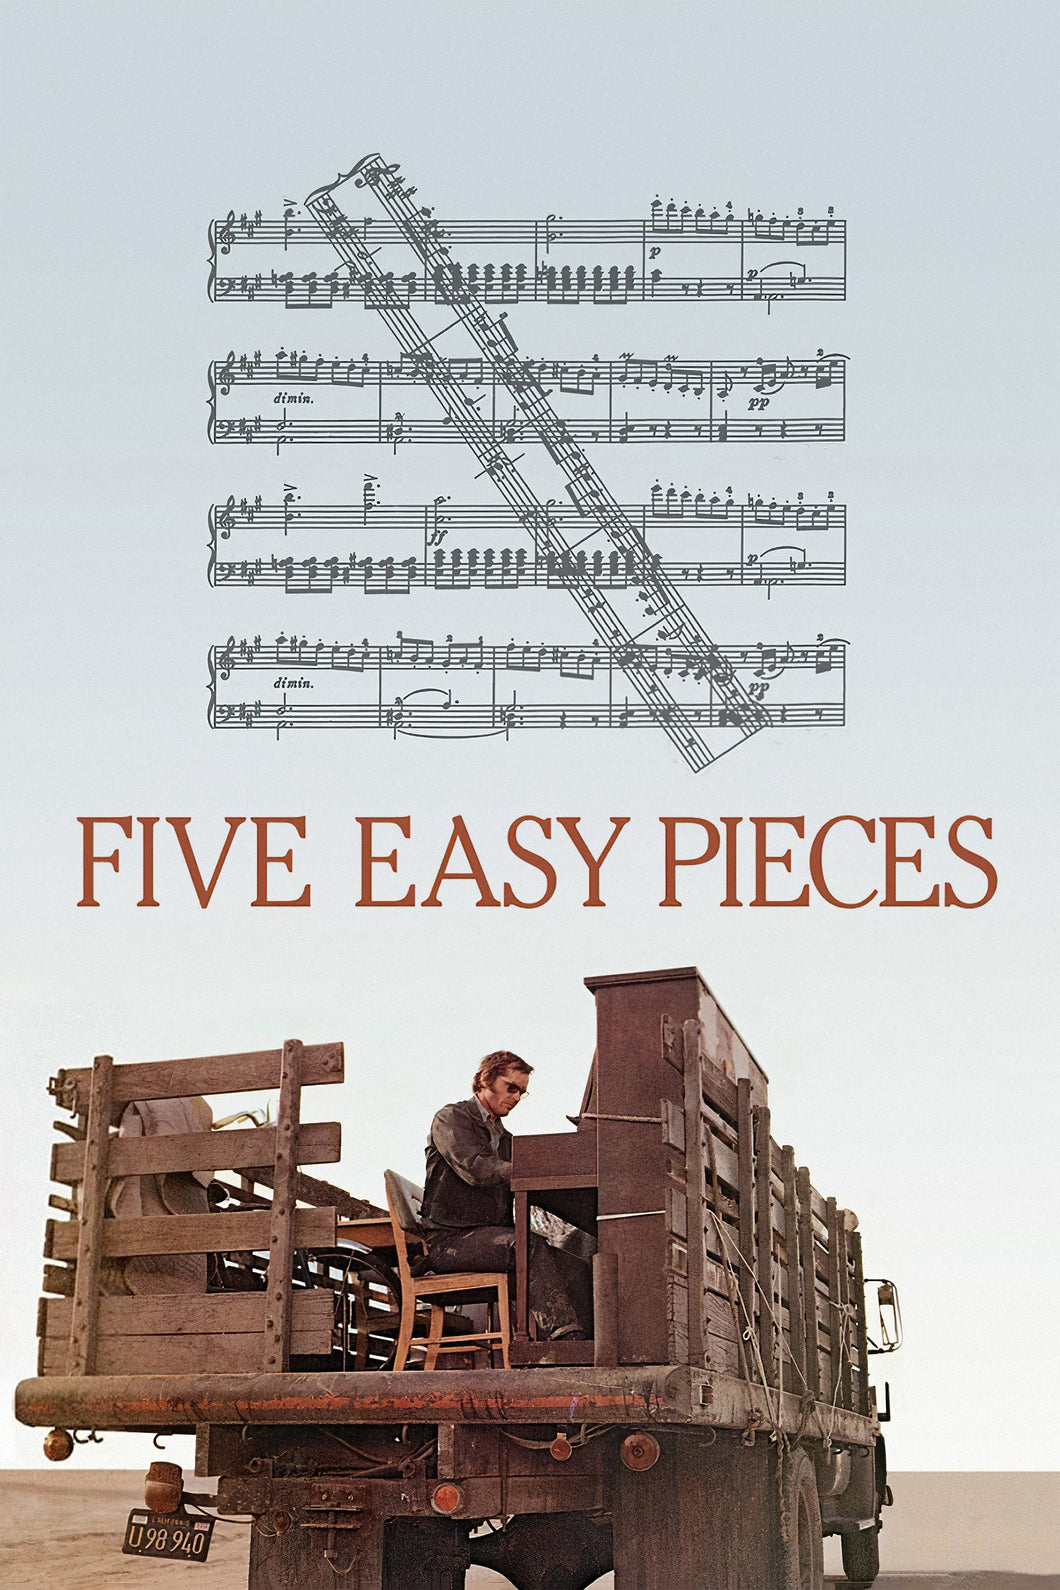 Five Easy Pieces (1970) Movie Poster High Quality Glossy Paper A1 A2 A3 A4 A3 Framed or Unframed!!!